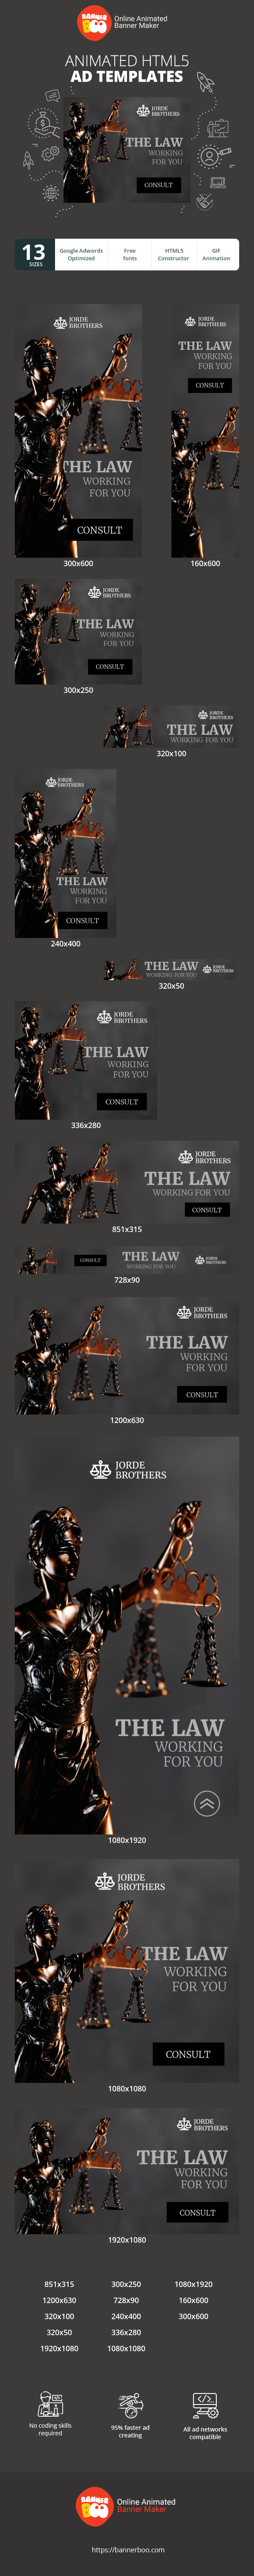 Banner ad template — The Law Working For You — Lawyer